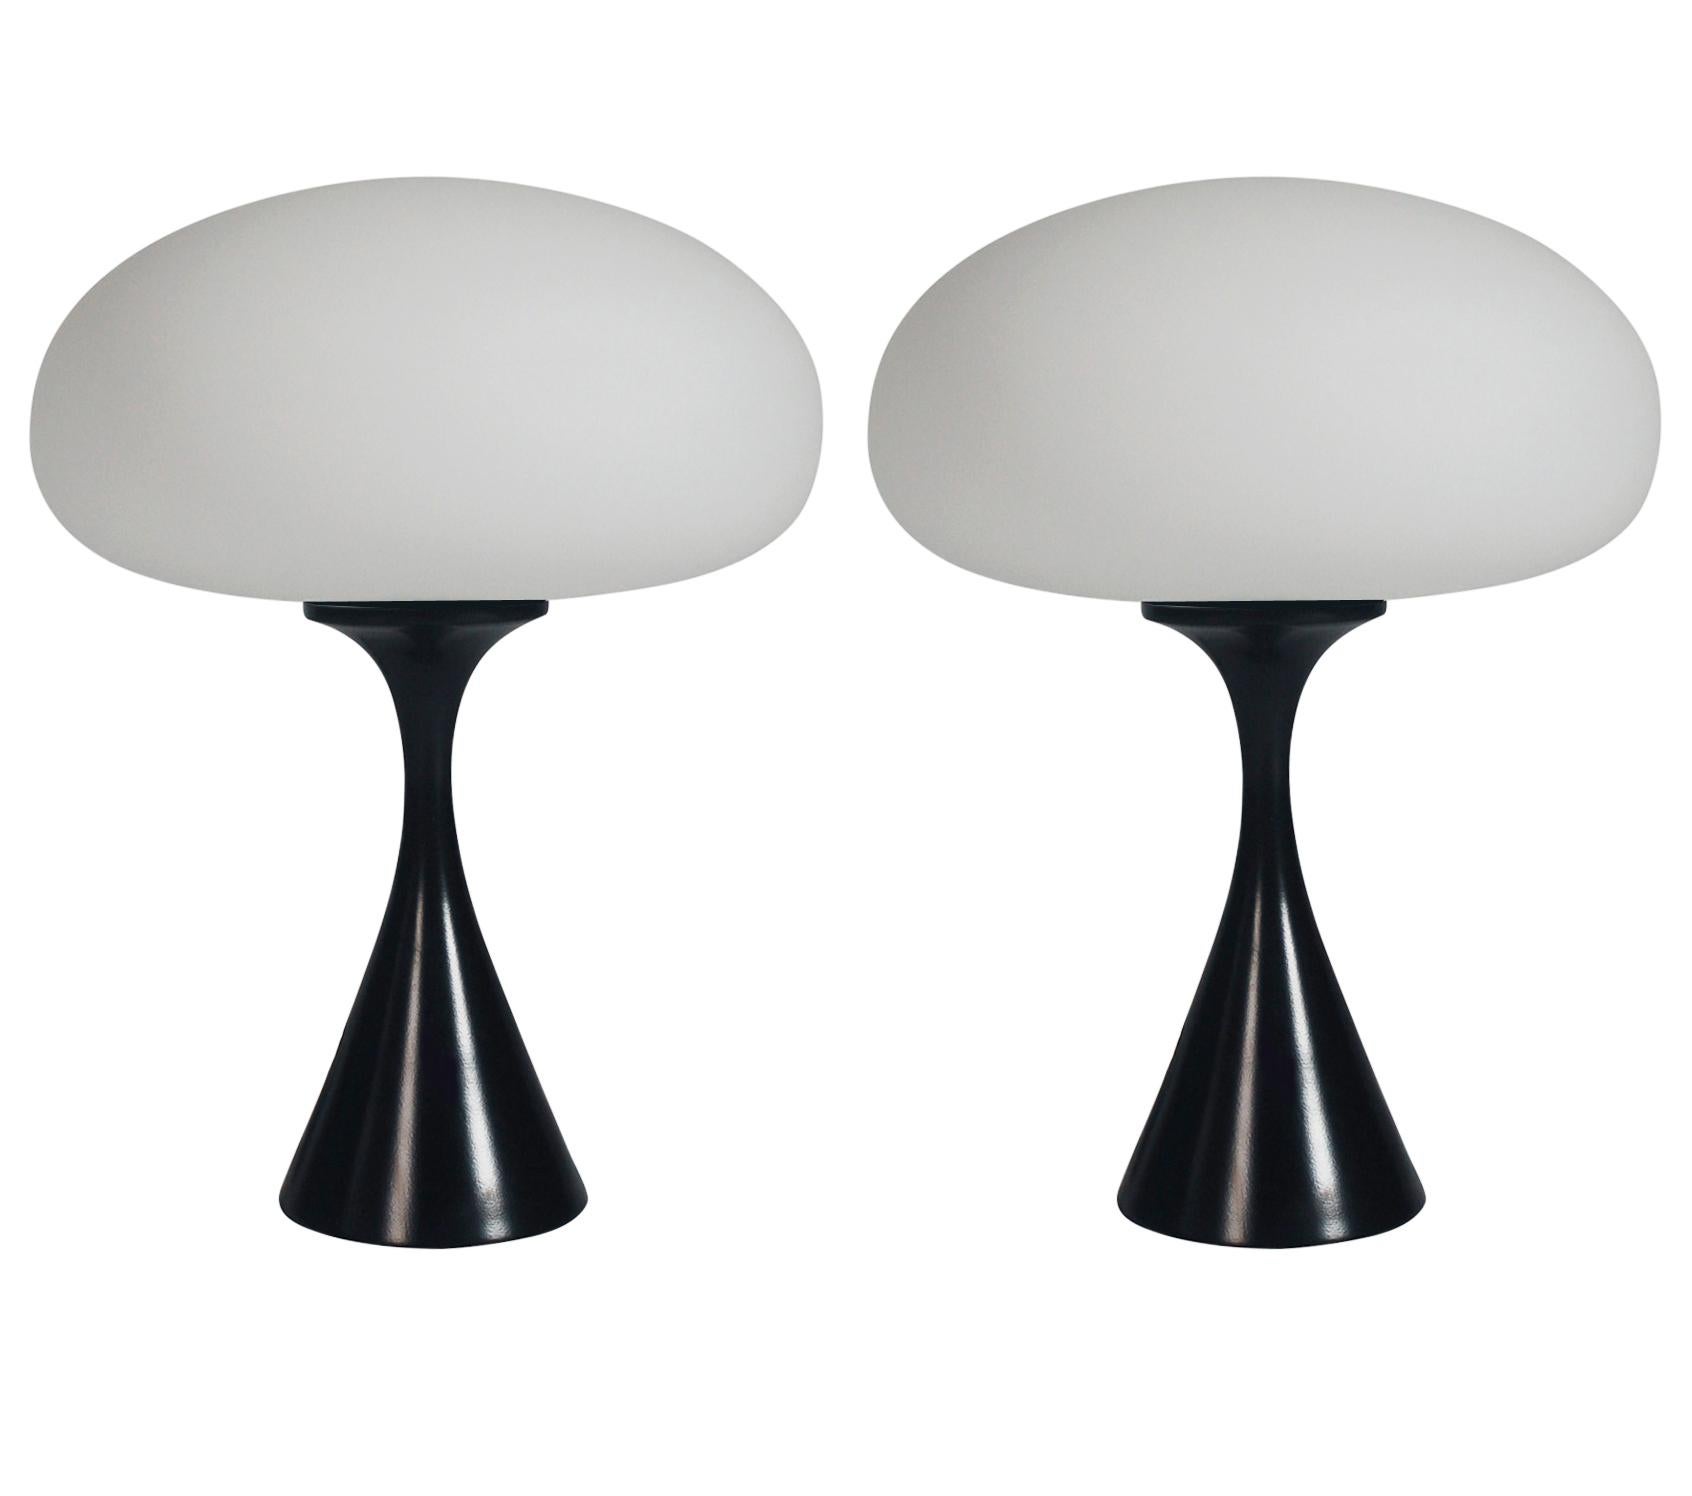 Pair of Mid-Century Modern Table Lamps by Designline in Black & White Glass For Sale 1